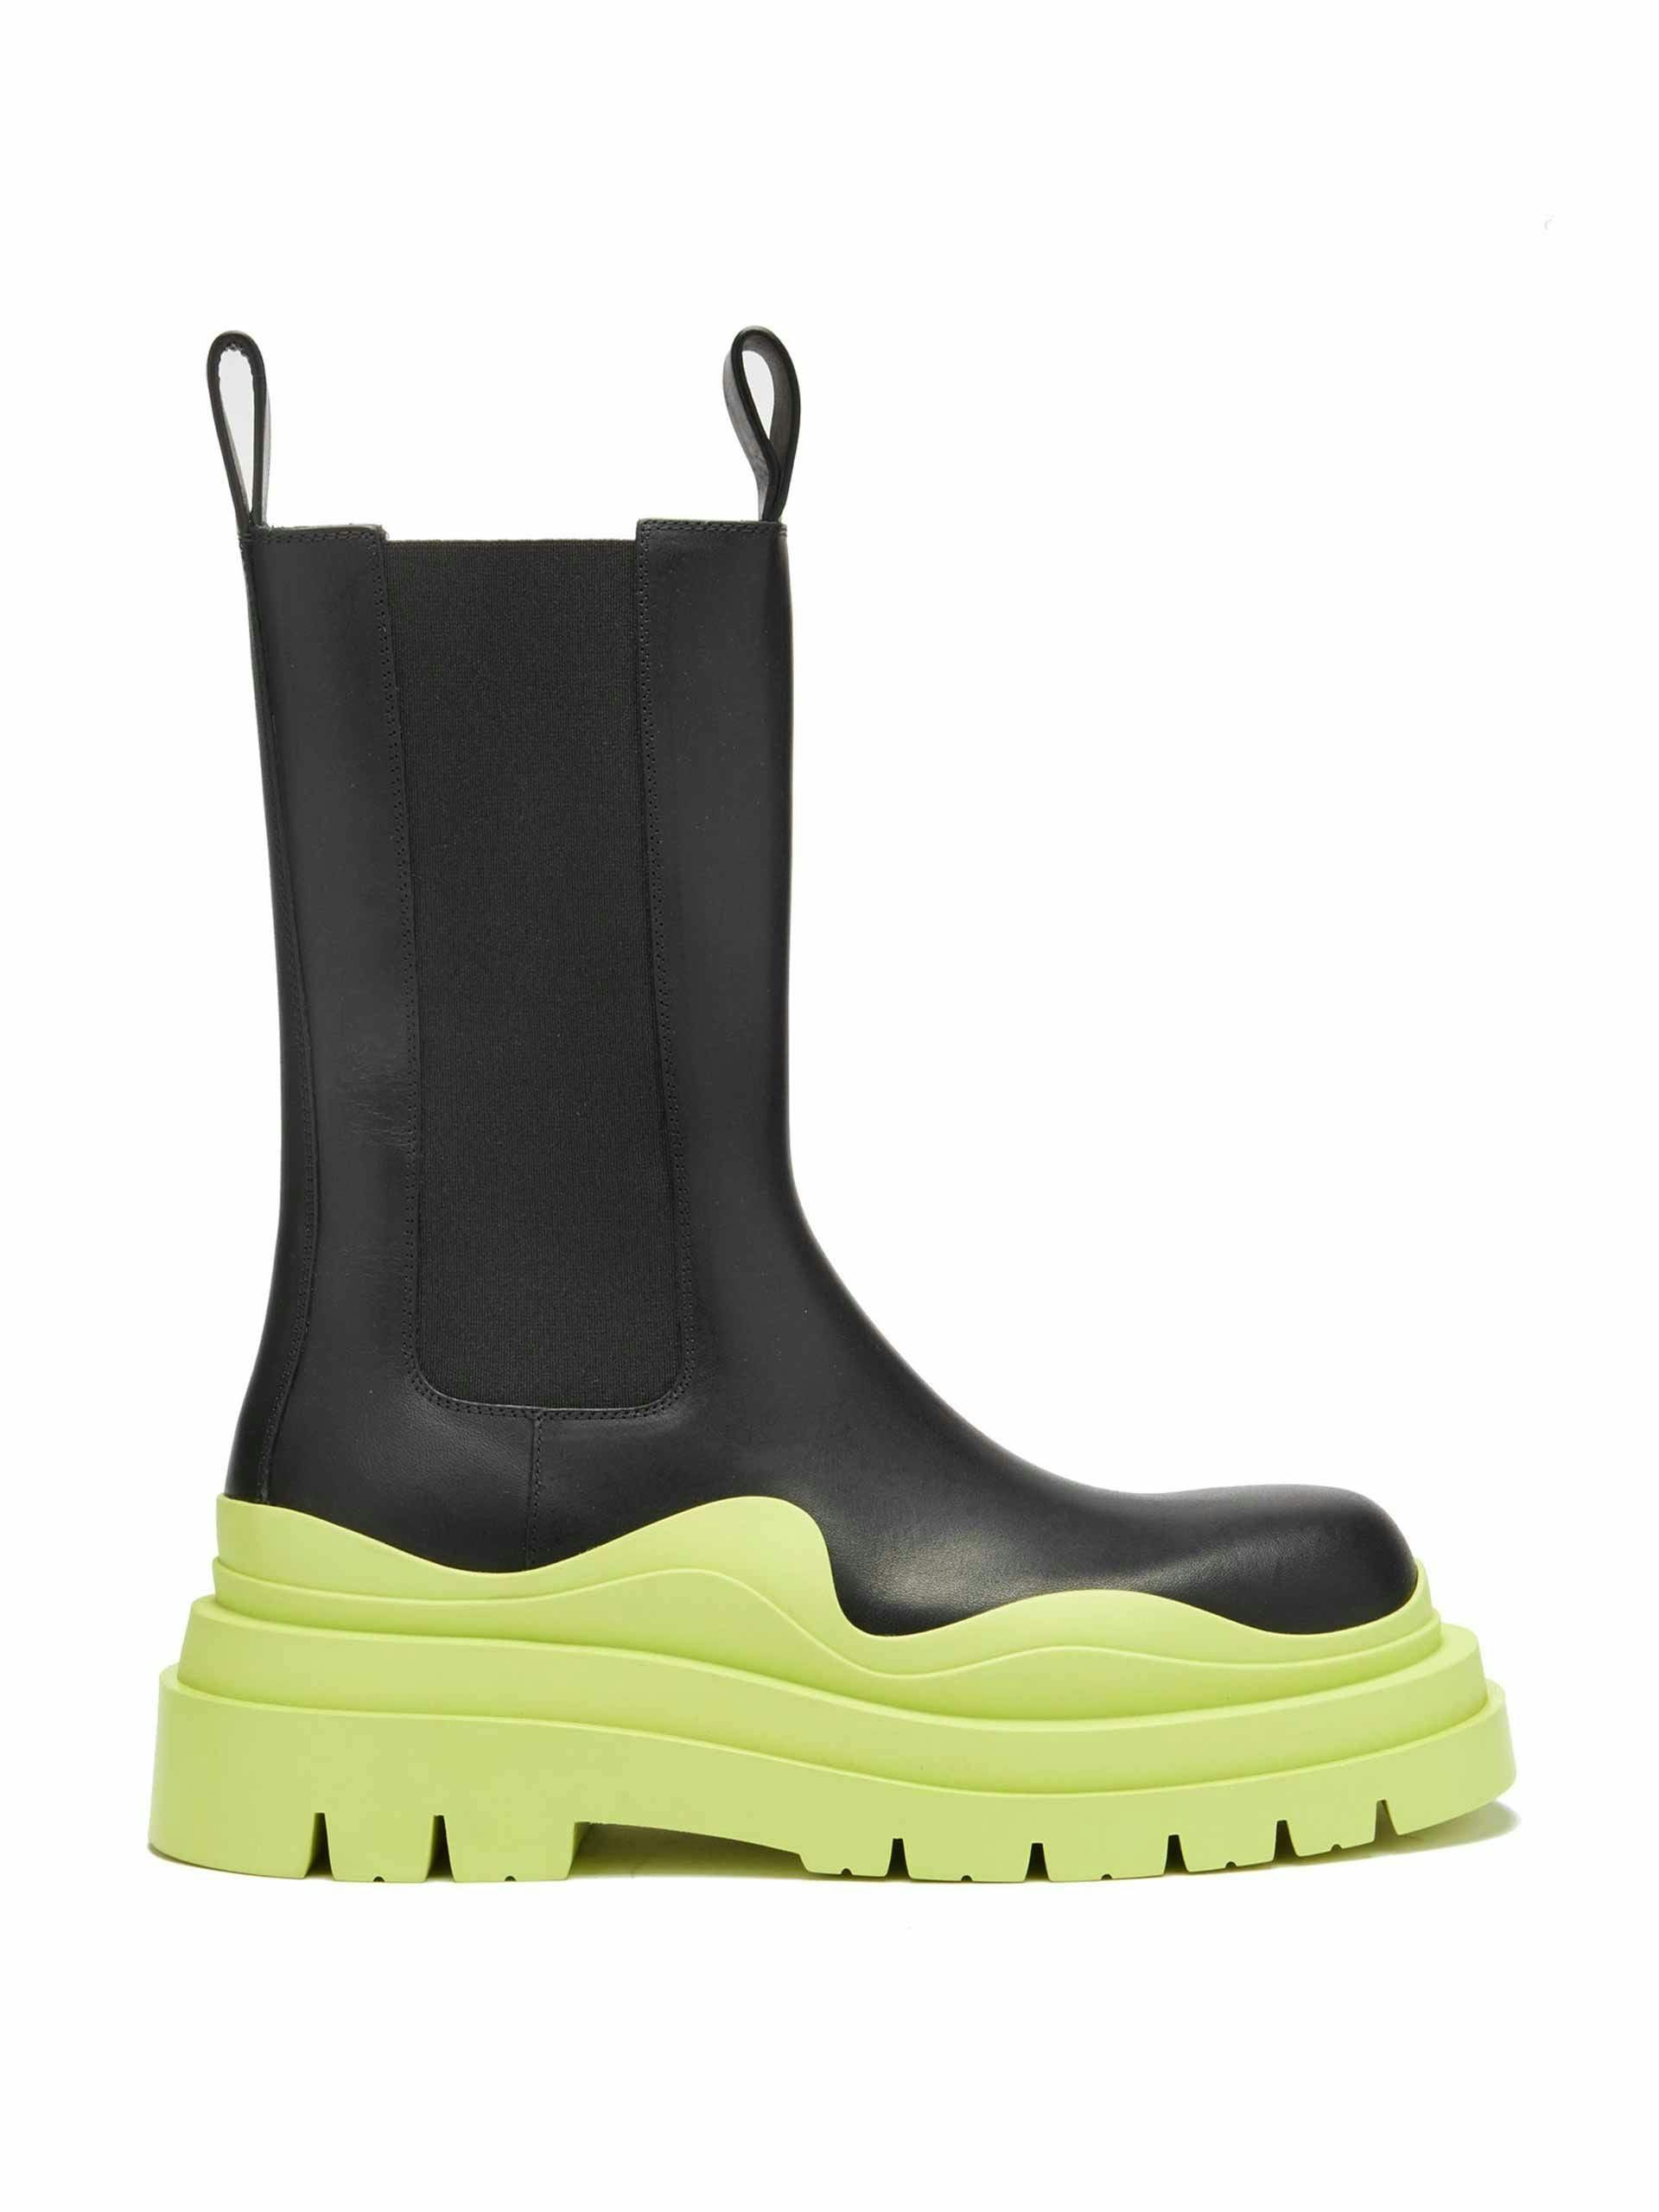 Chelsea boots with yellow sole